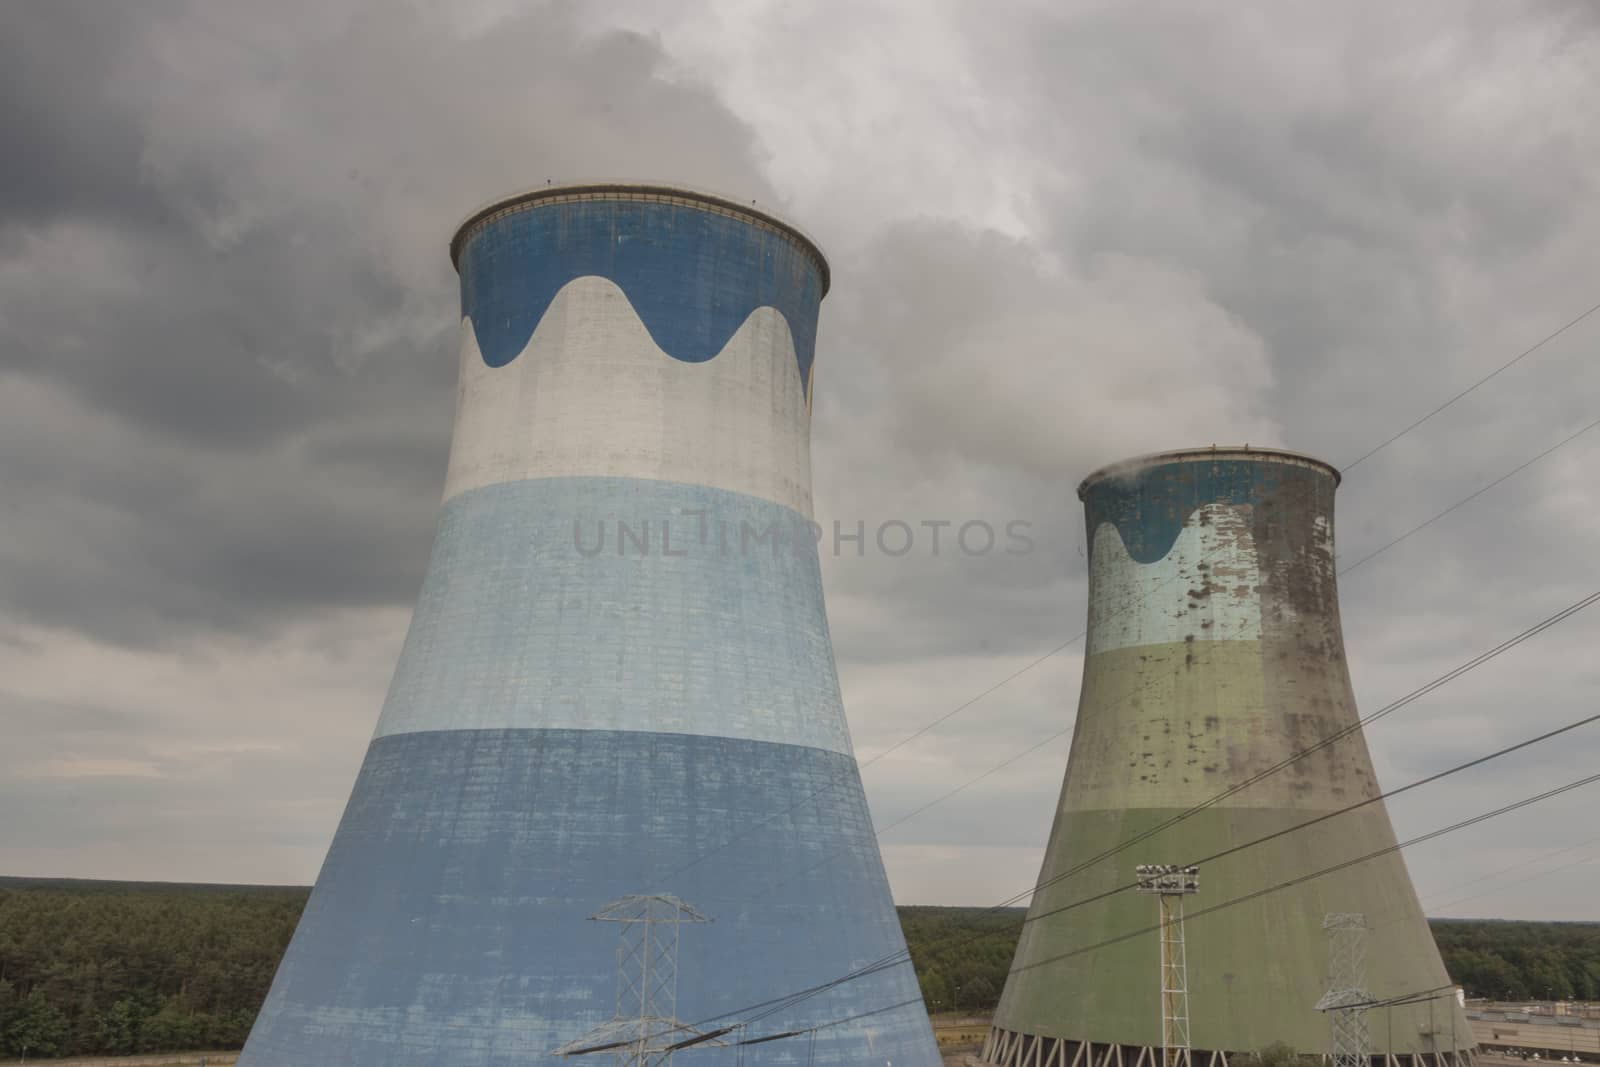 Cooling towers - coal power station in Opole, Poland.